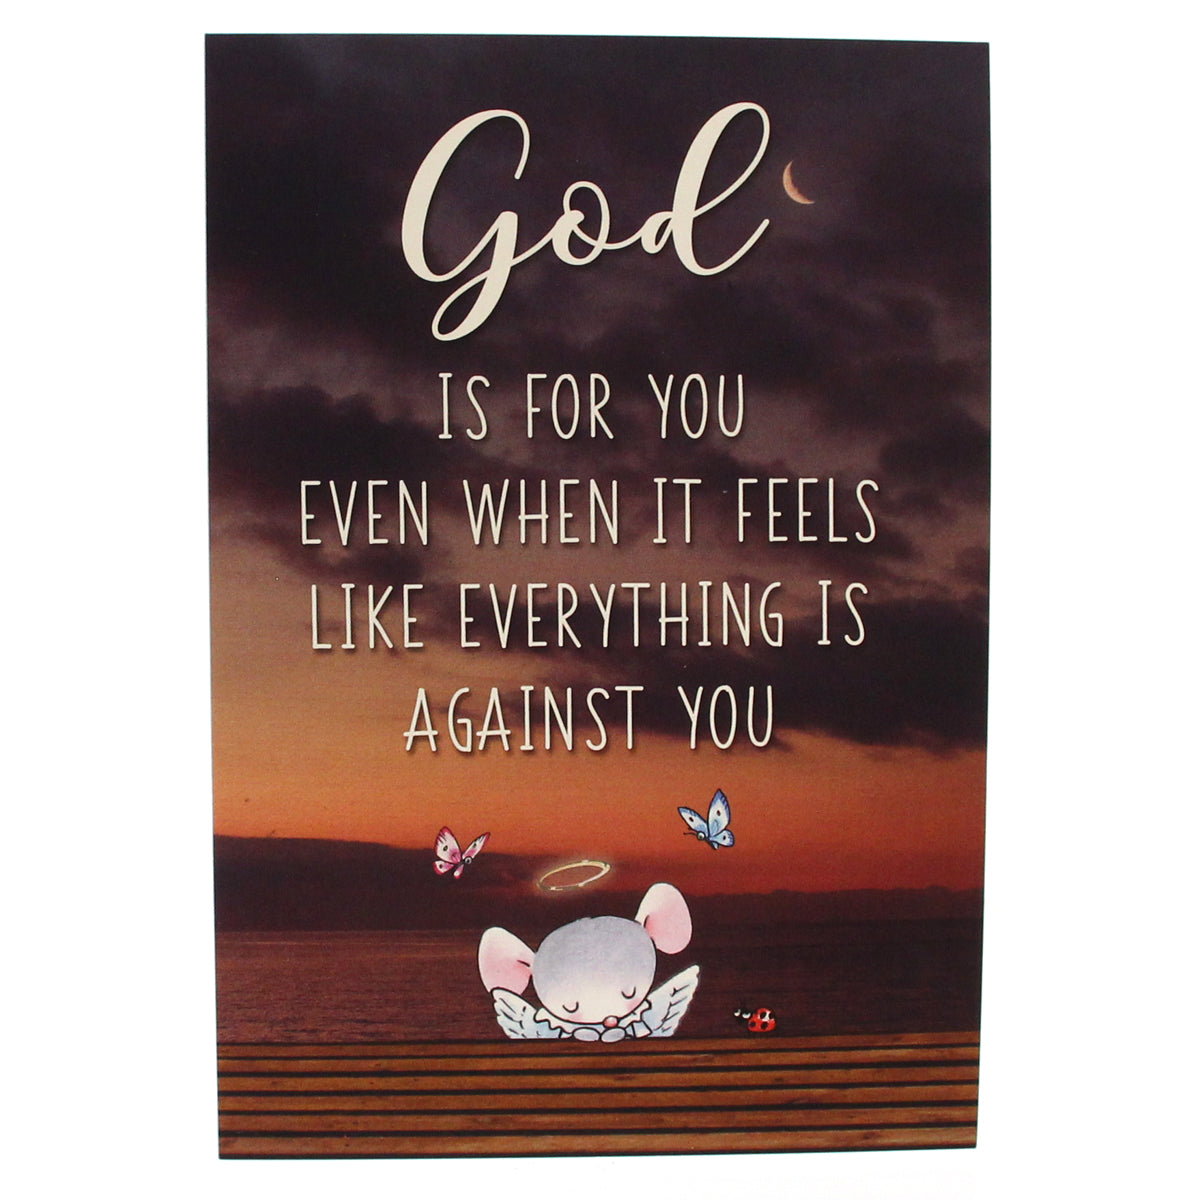 Encouragement & Support Card: God is for you... (w/Scripture verse)